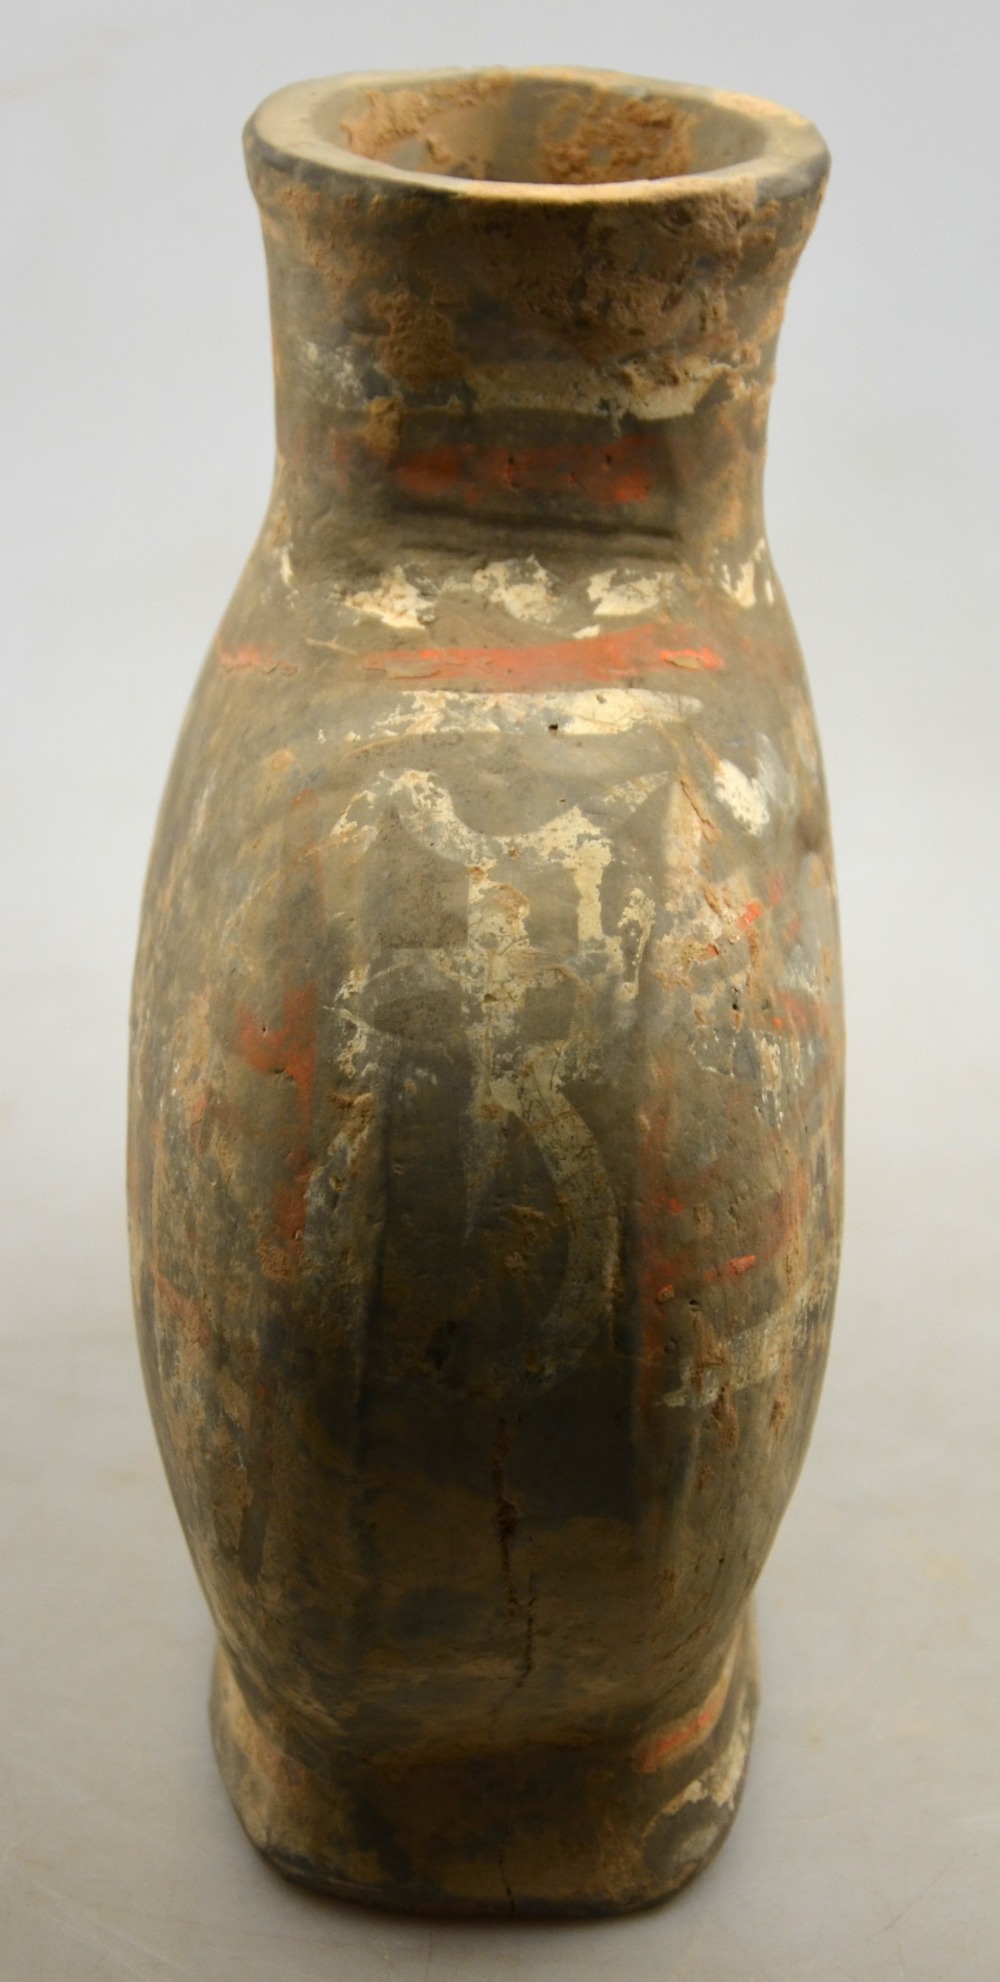 Chinese Han Dynasty 206 BC - 220 AD - a pottery flask with traces of cold pigment, 21 cm h. - Image 6 of 7